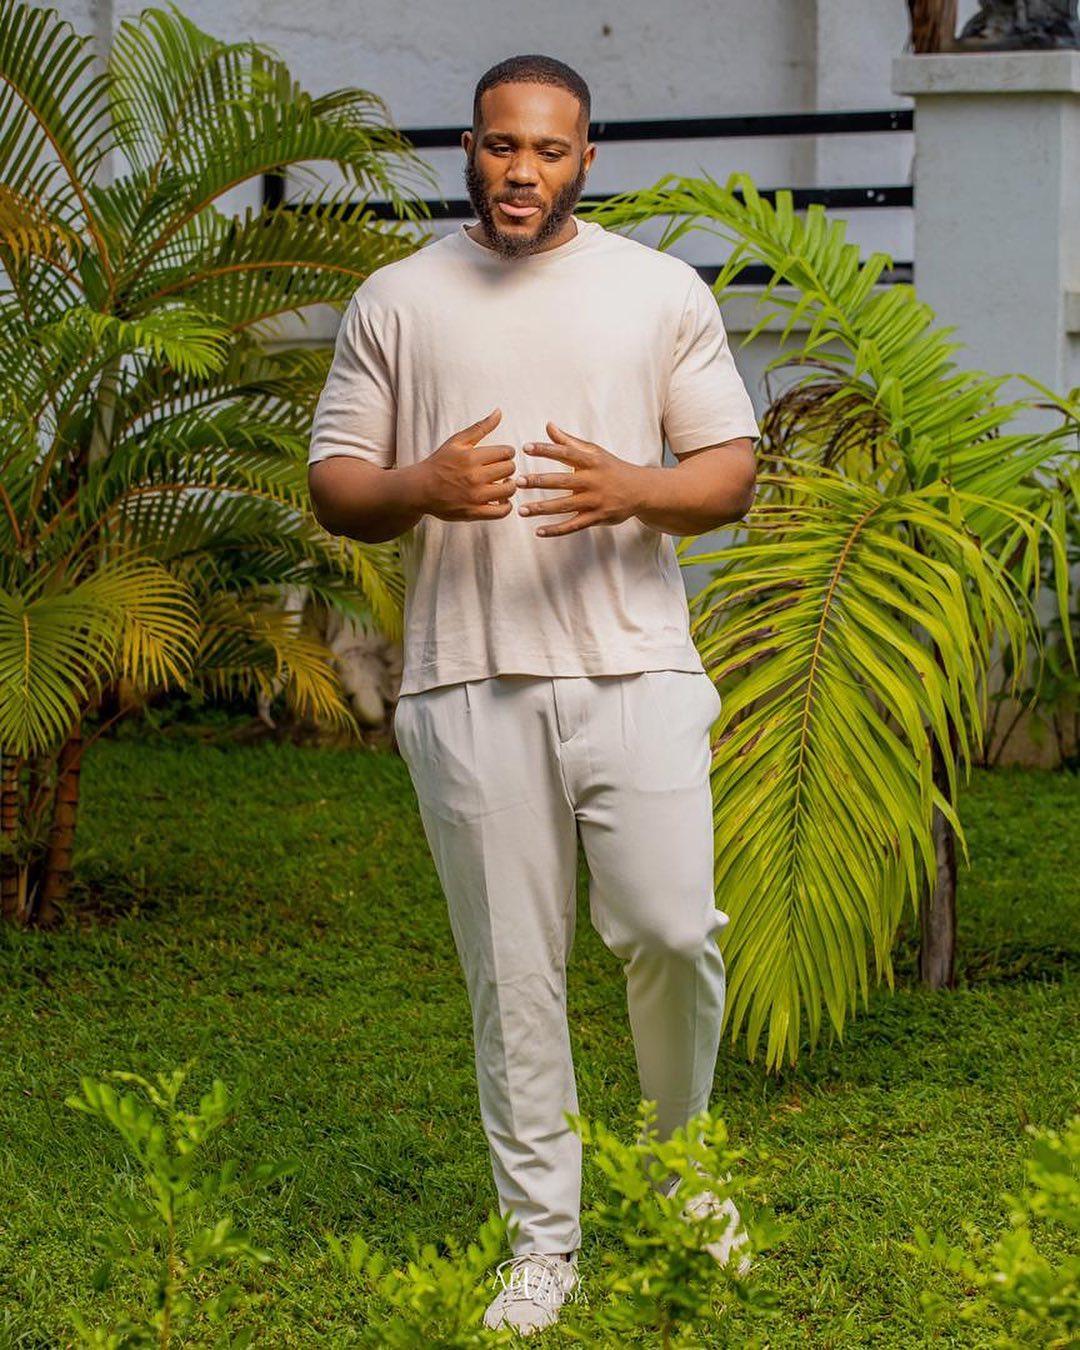 Nigerian billionaire, Terry Waya has revealed why he allowed his son, Kiddwaya carry out his National Youth Service Corps, NYSC, in Abia State.